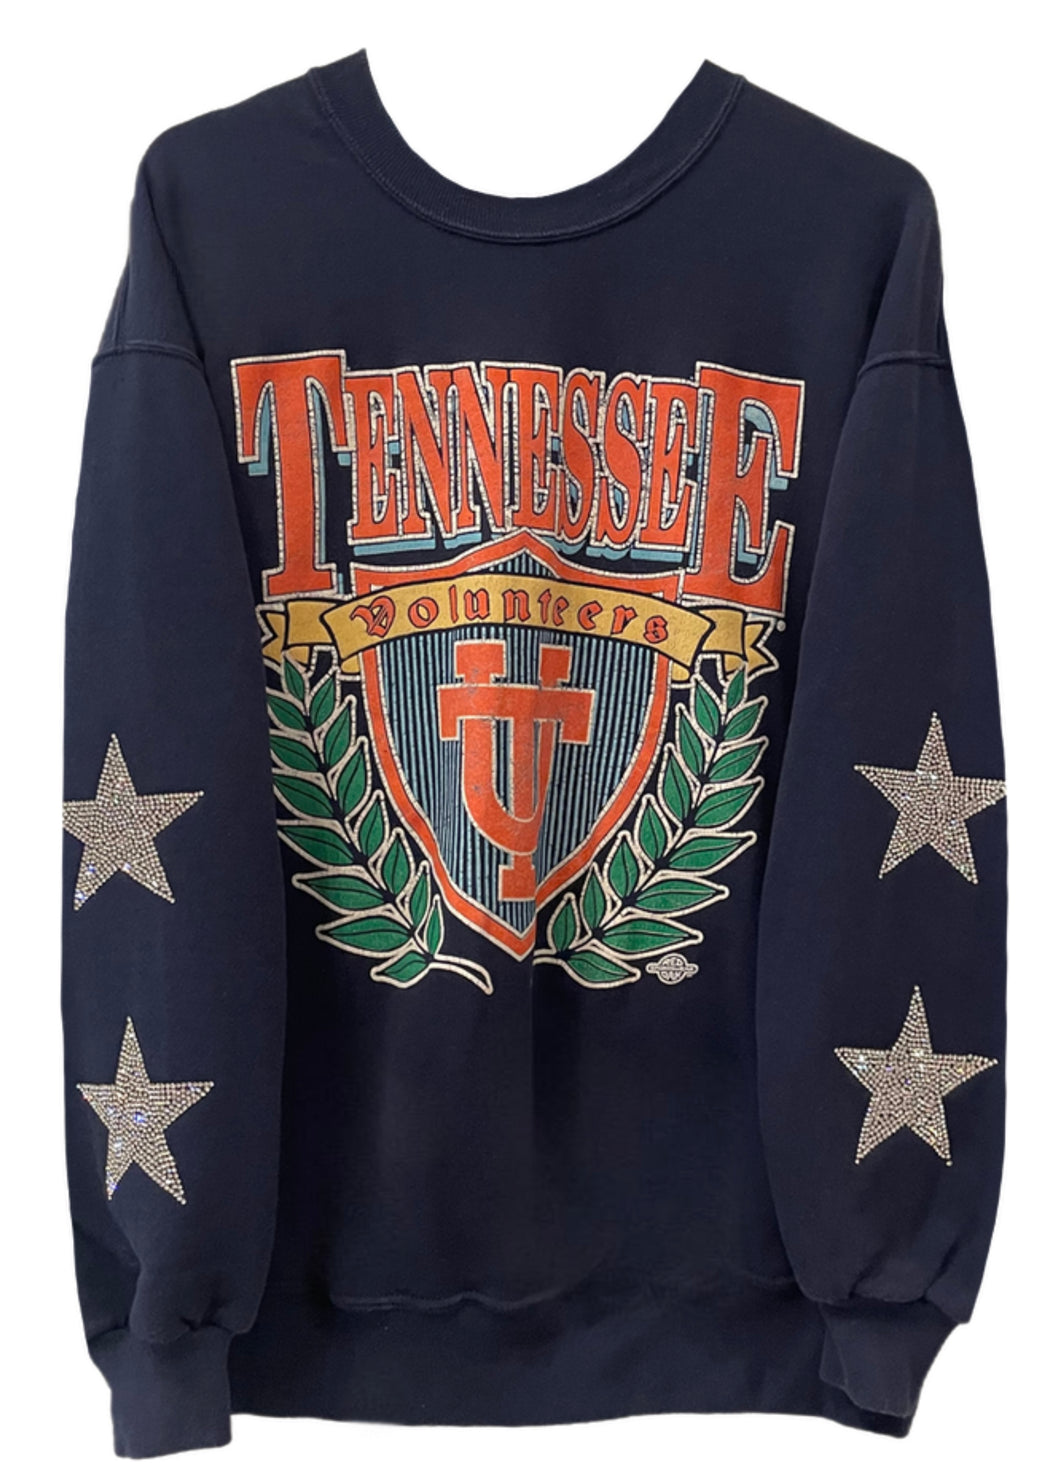 University of Tennessee, ”Rare Find” One of a KIND Vintage Sweatshirt with Crystal Star Design